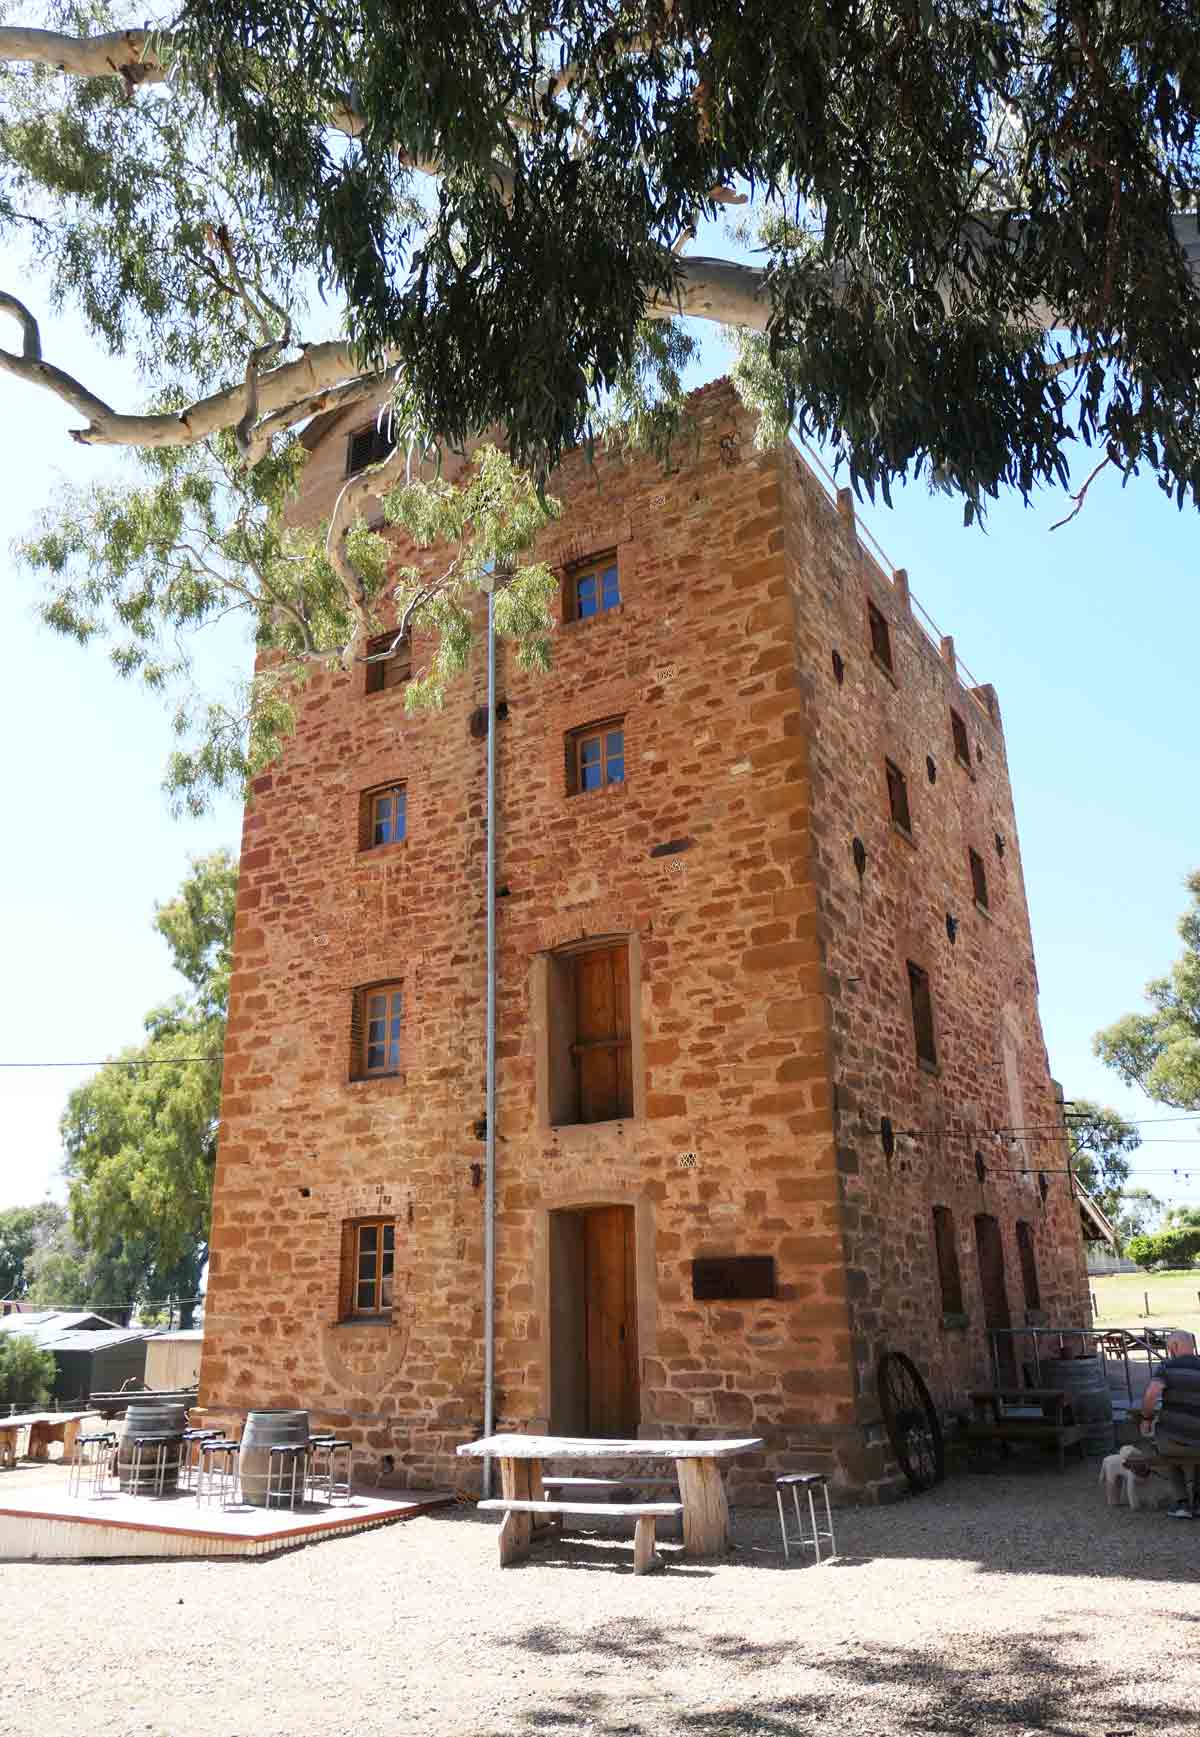 The Tower at Jacka Brothers Brewery in Melrose, South Australia